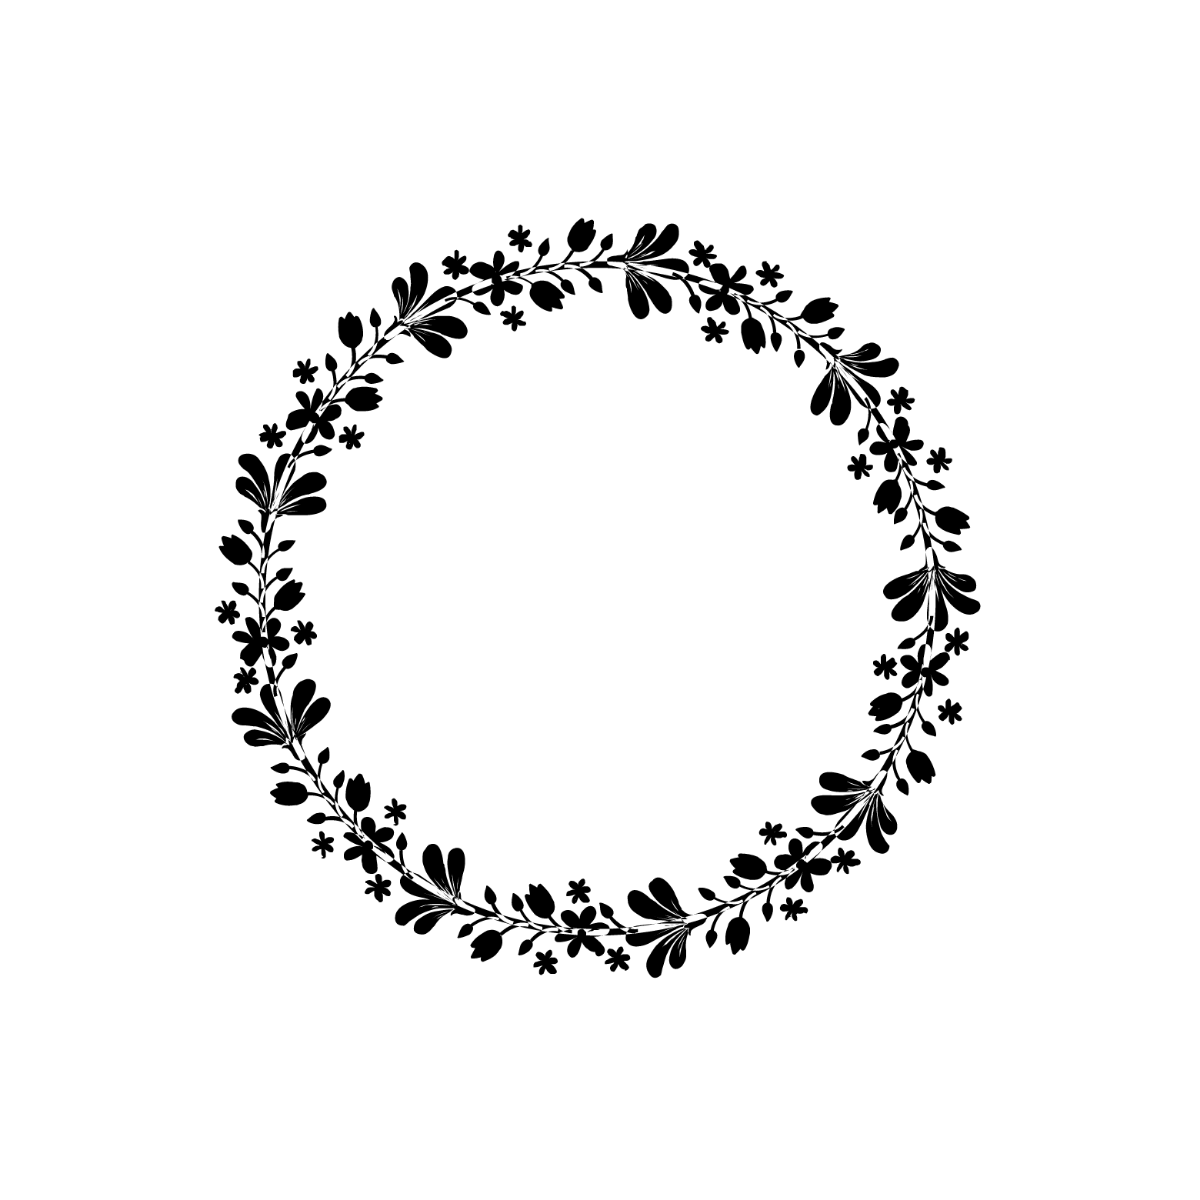 Free Black and White Floral Wreath Vector Template